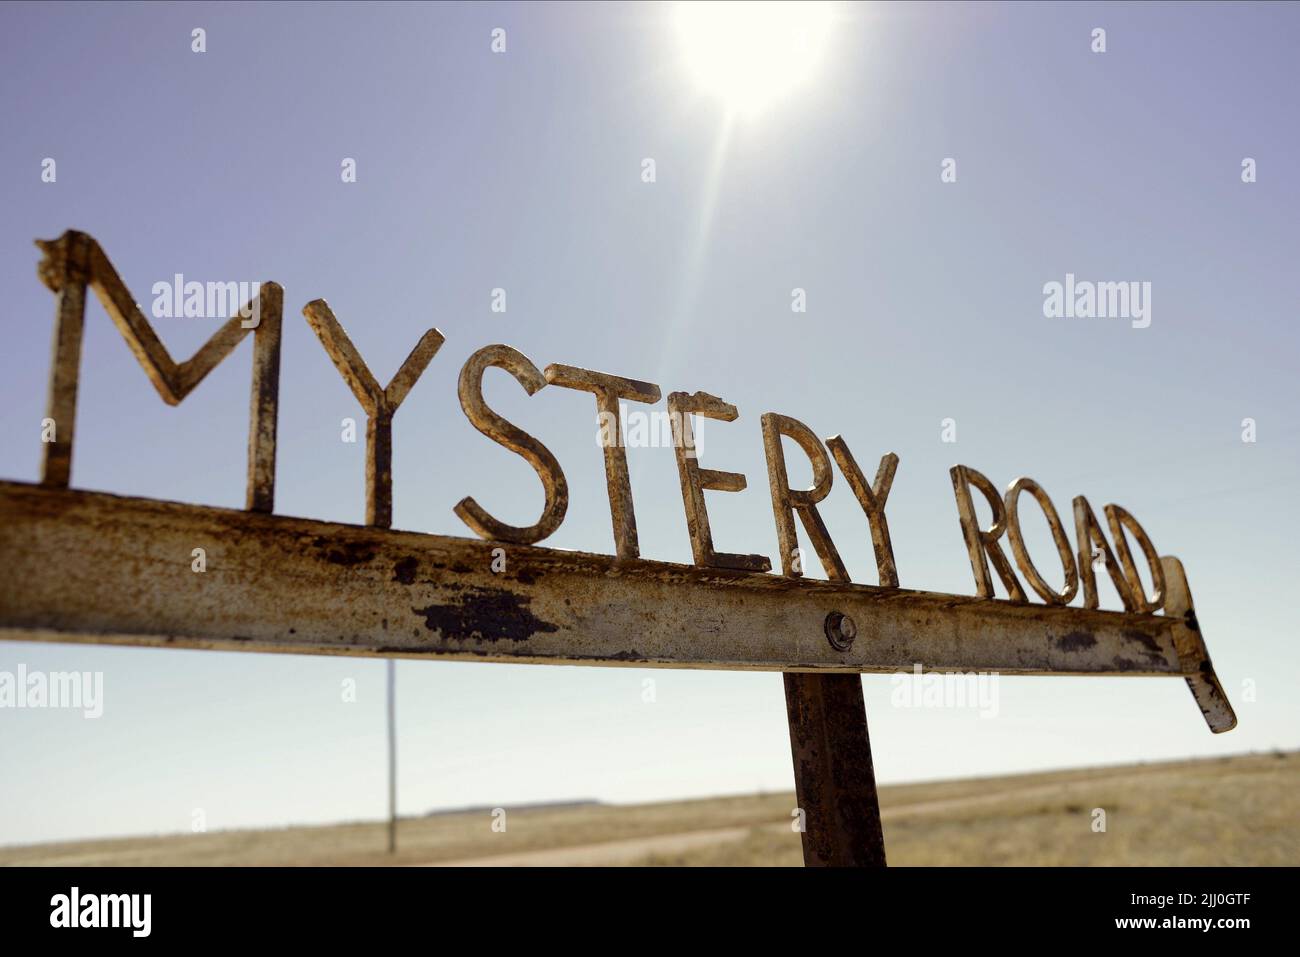 ROAD SIGN, MYSTERY ROAD, 2013 Stock Photo